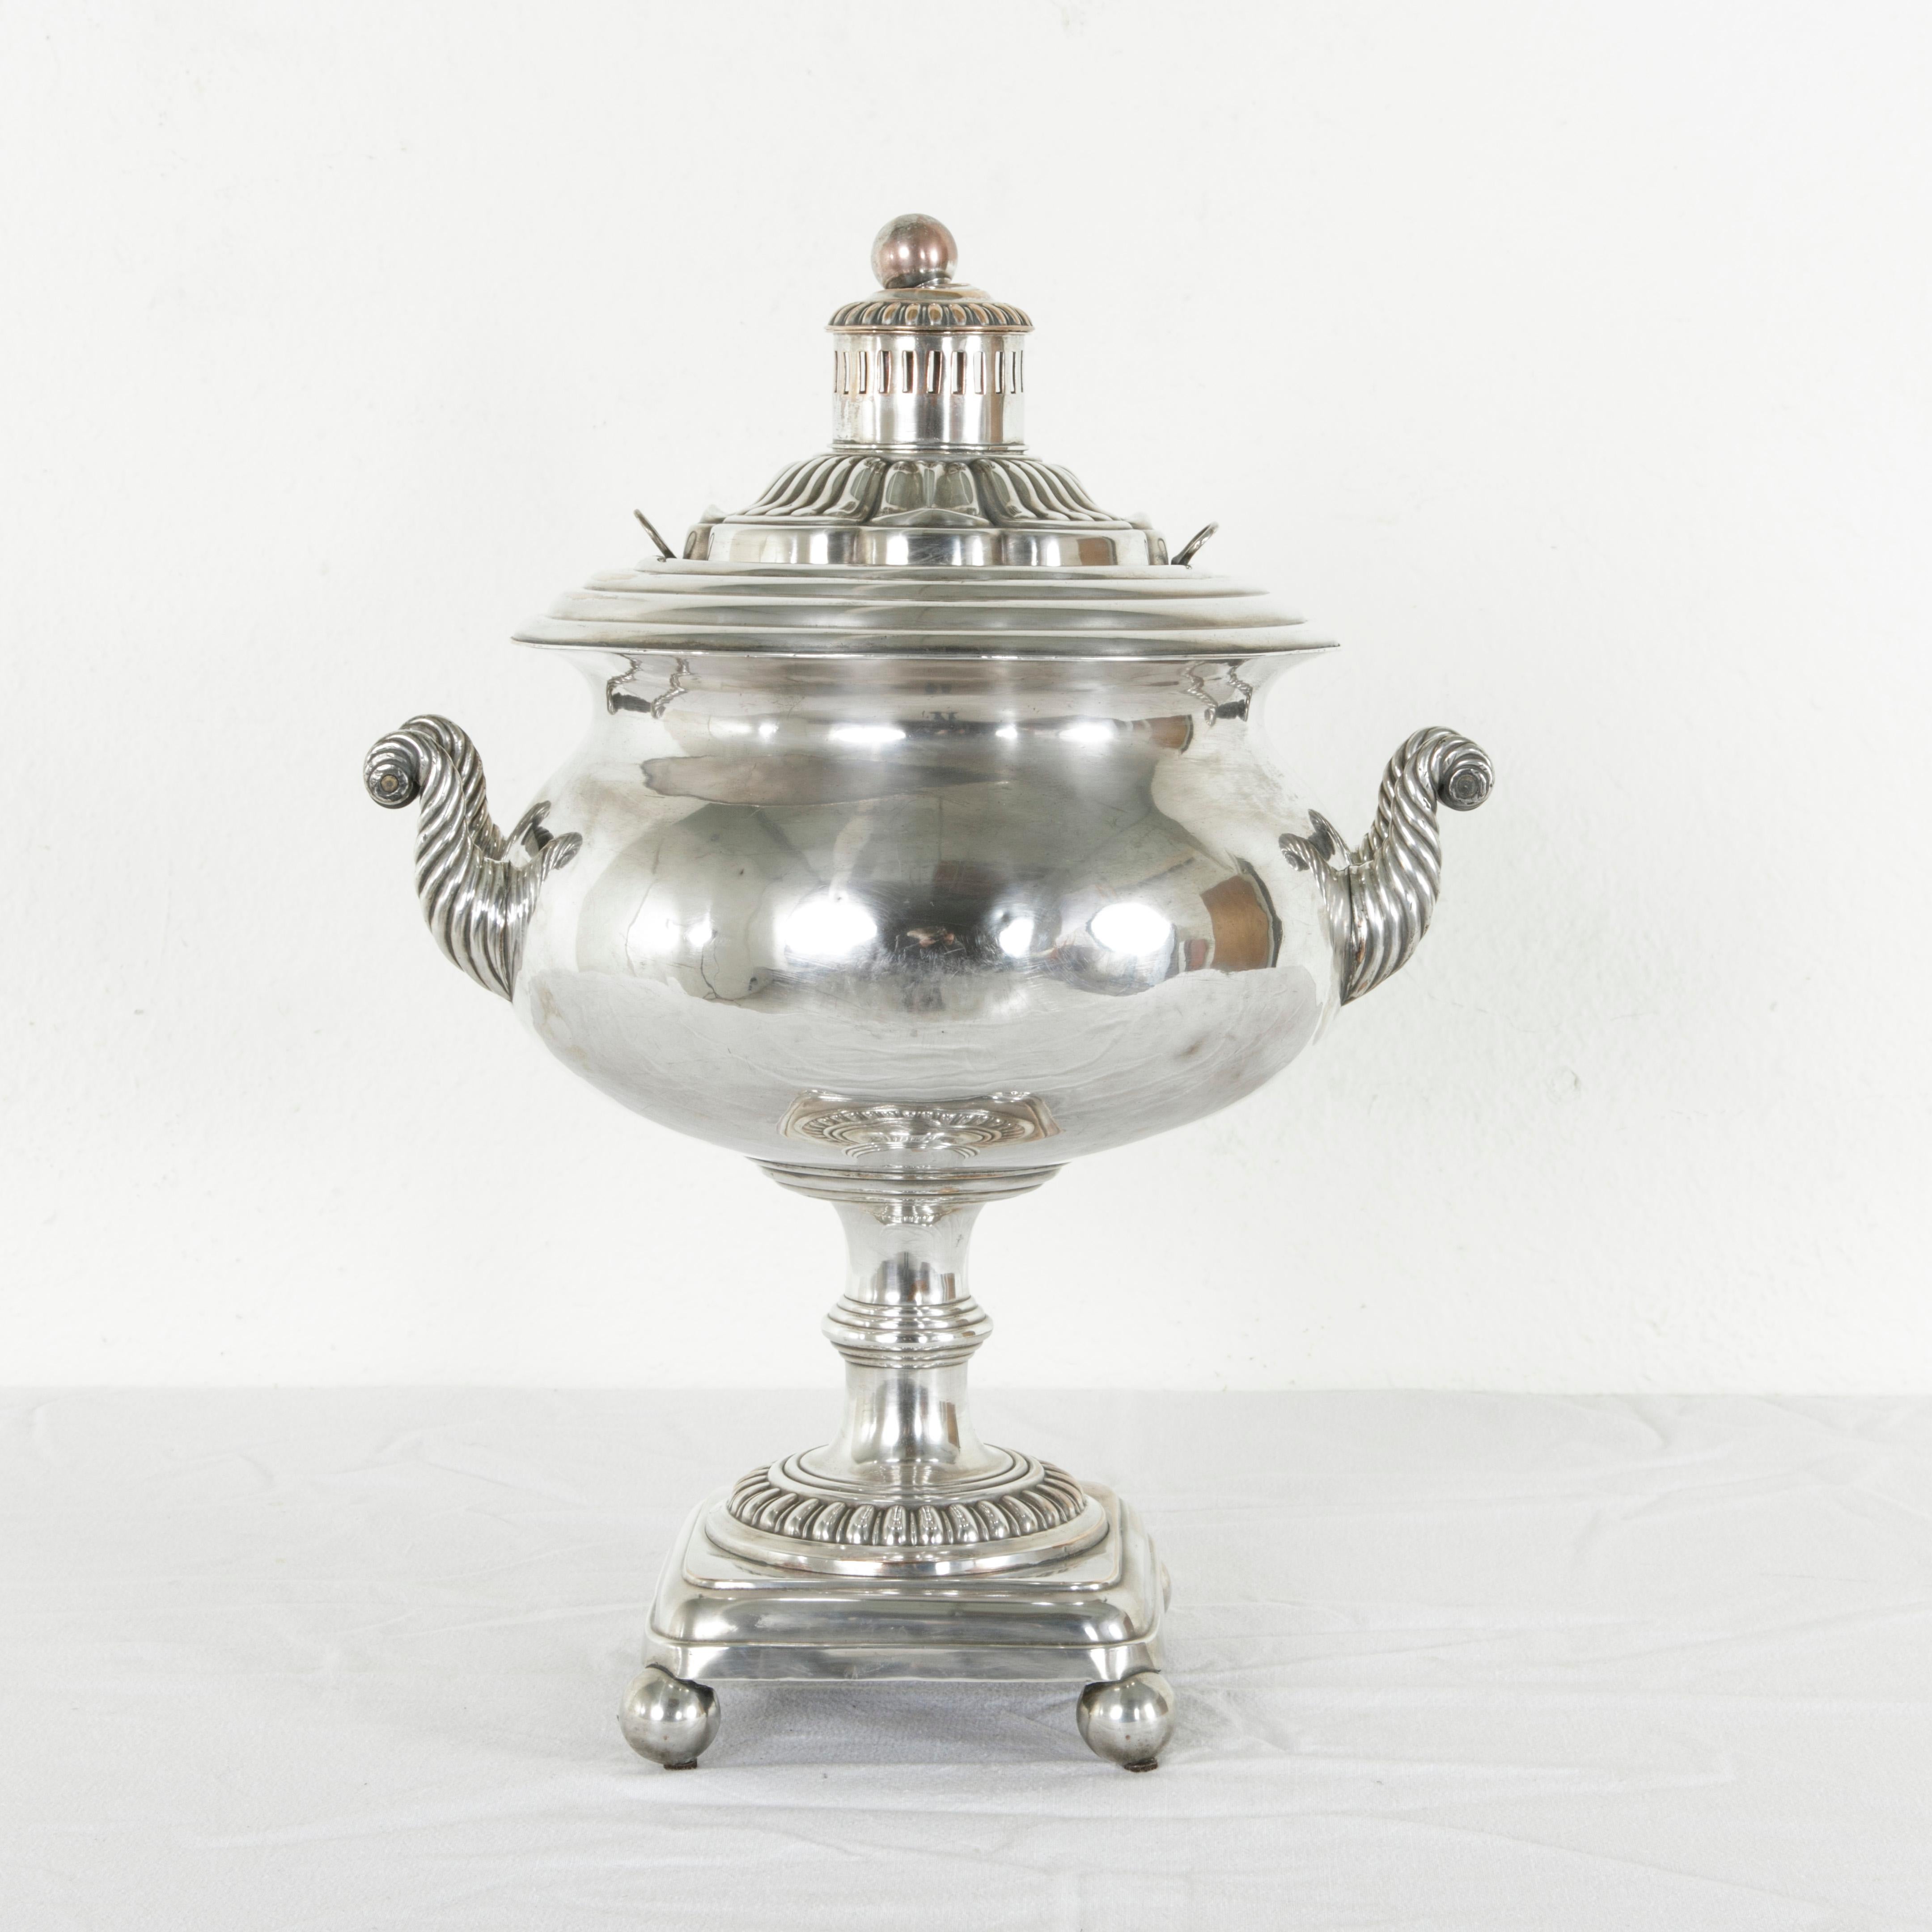 French Late 19th Century Silver Samovar or Tea Urn with Lid and Ebonized Handles